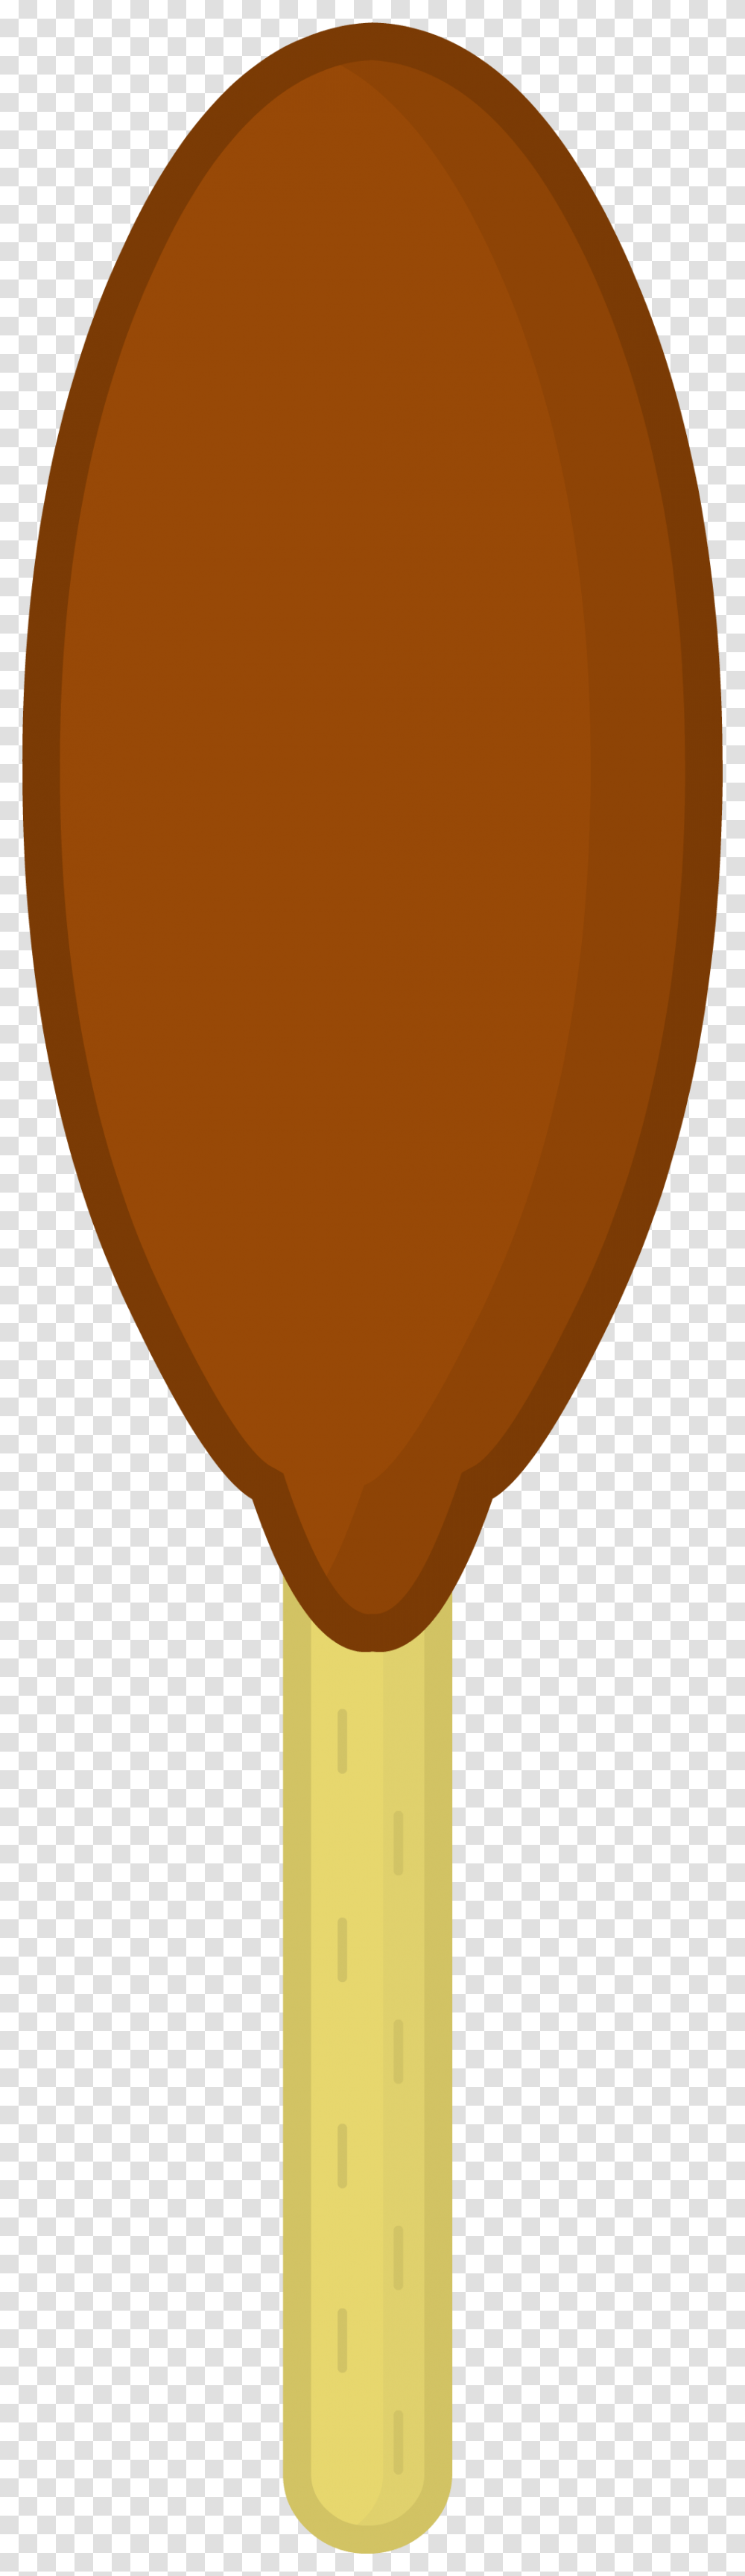 New Corn Dog Body Bfdi Corn Dog, Leisure Activities, Drum, Percussion, Musical Instrument Transparent Png